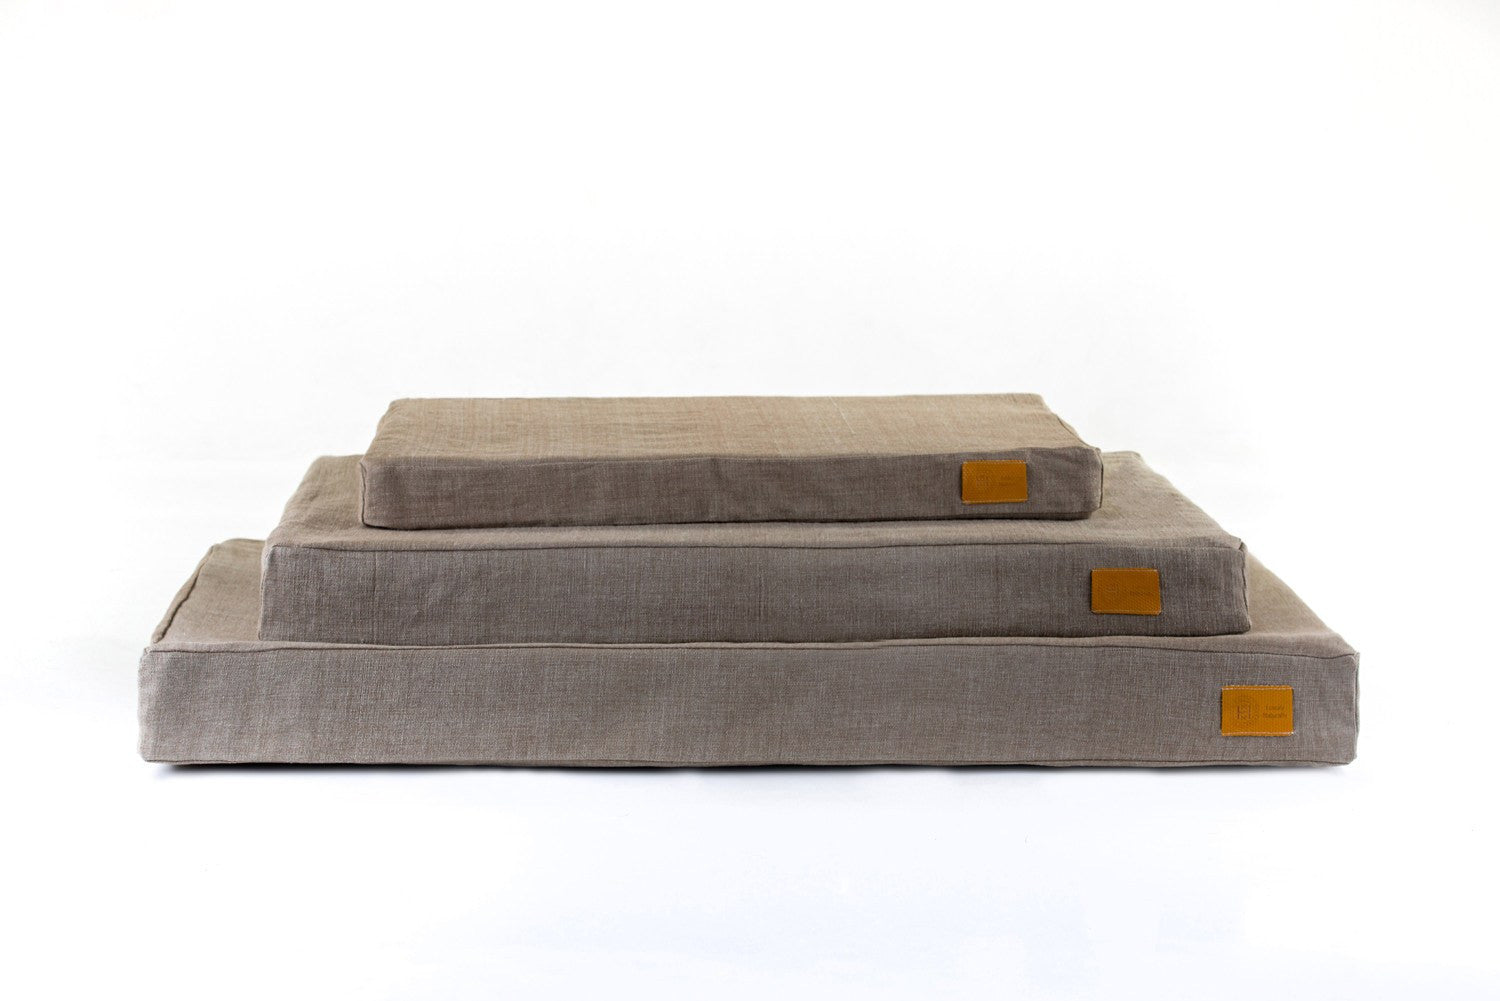 Stack of organic olive cotton Wild Rover natural dog beds. Made from organic materials in Britain.